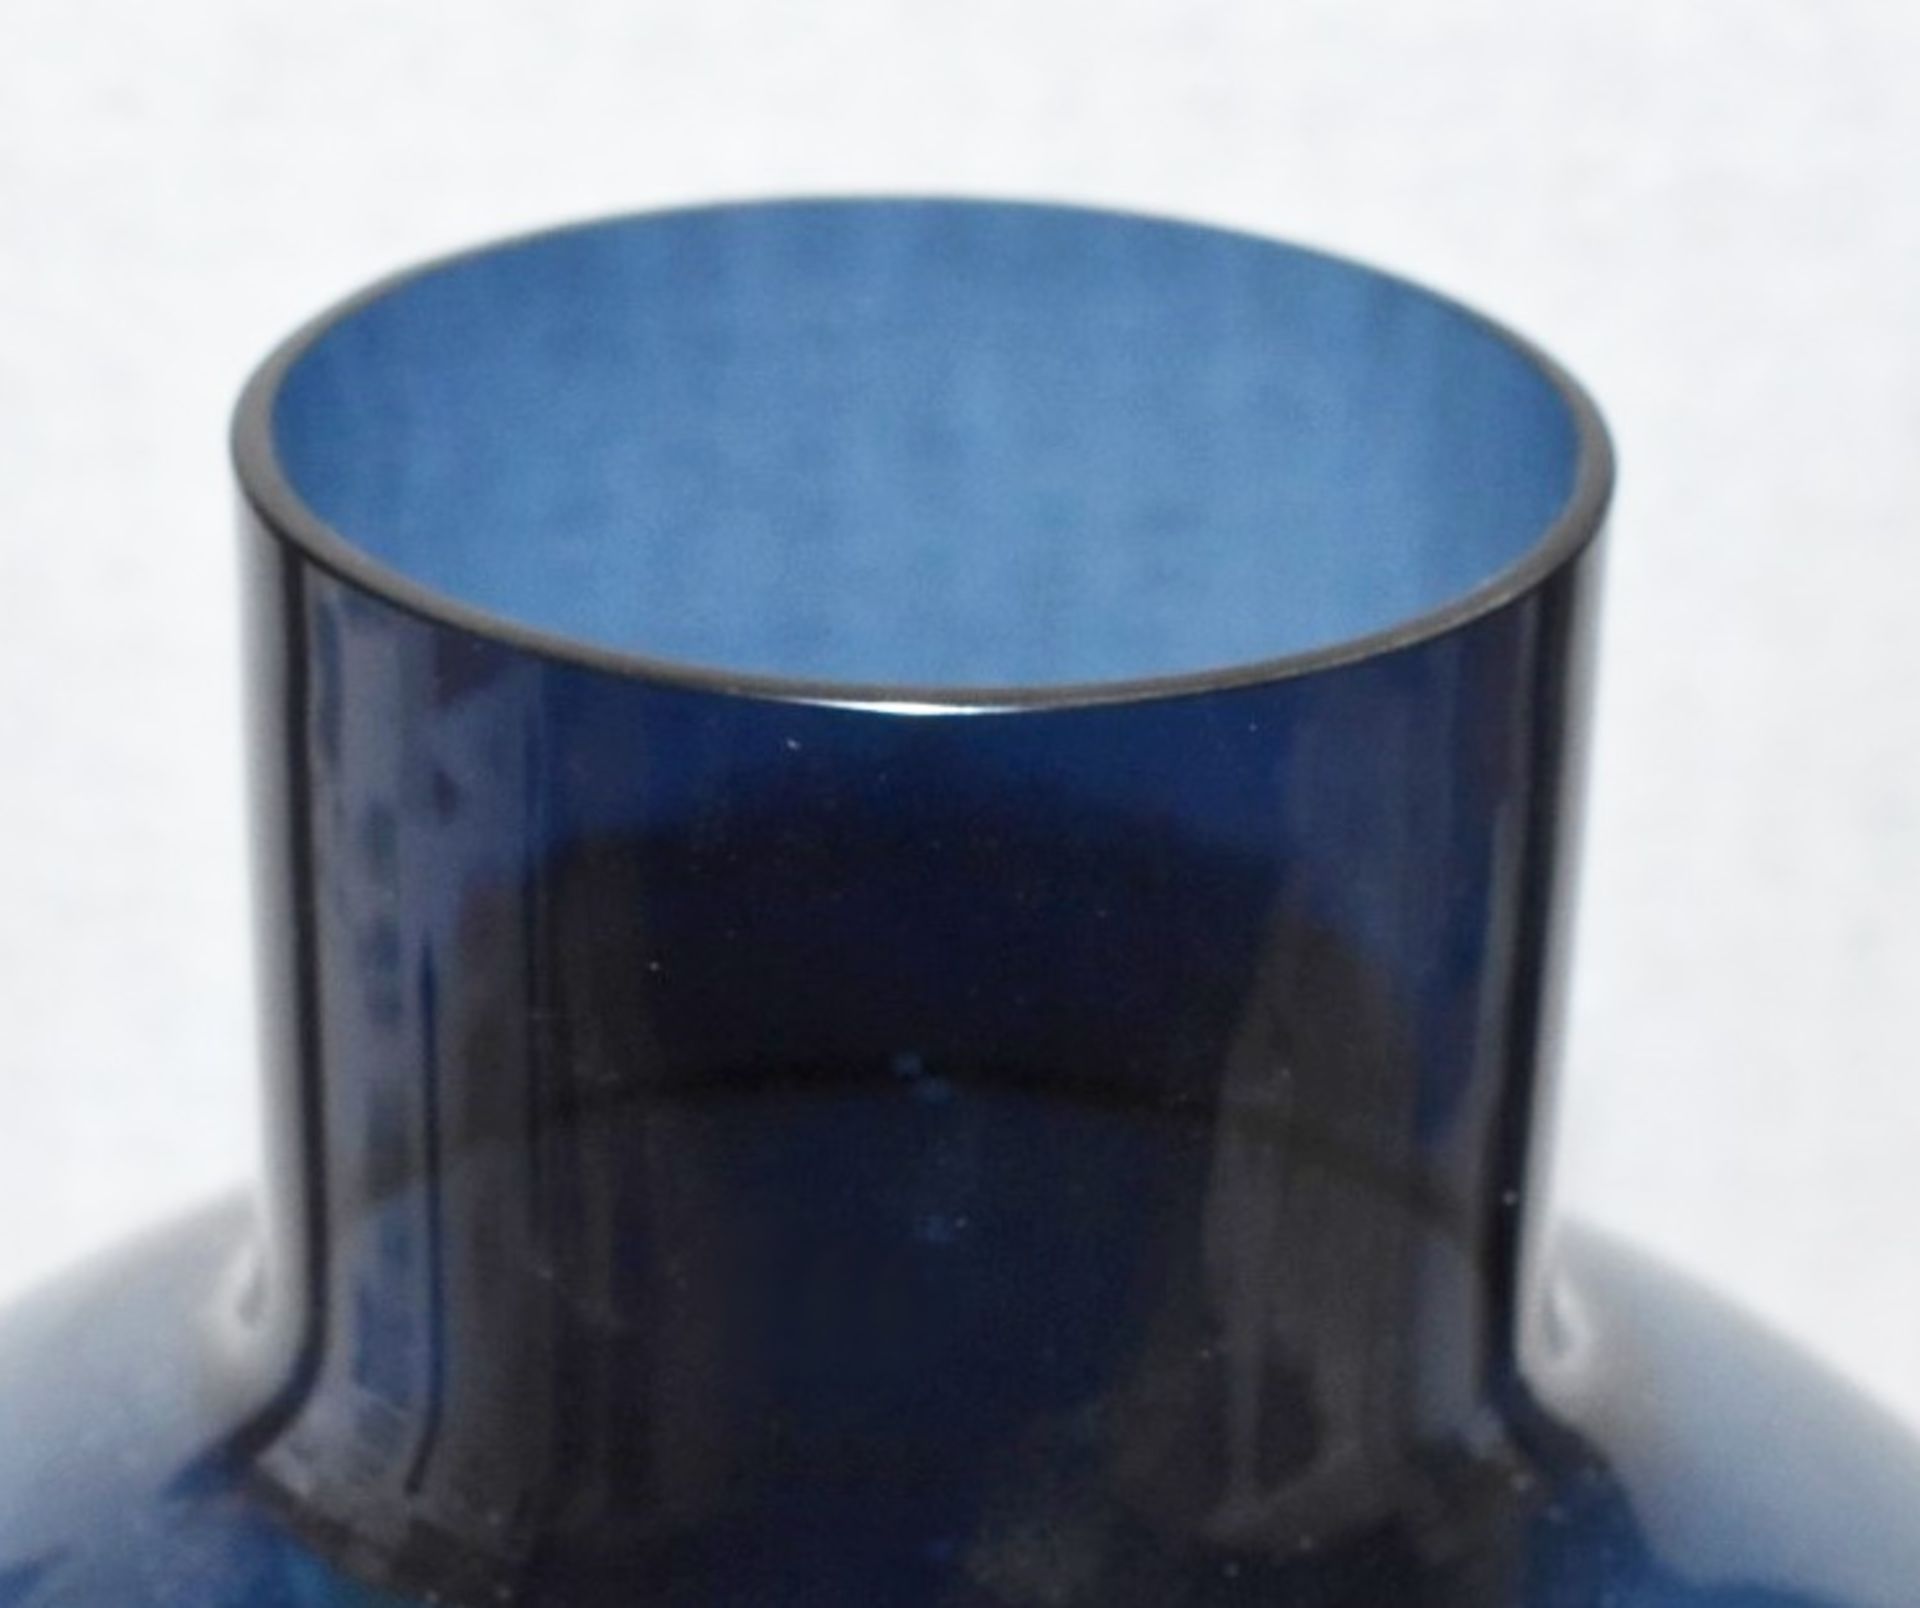 1 x POLTRONA FRAU 'Pallo Pot' High Quality Blown Glass Vase in Midnight Blue - RRP £1,080 *Signed* - Image 3 of 7